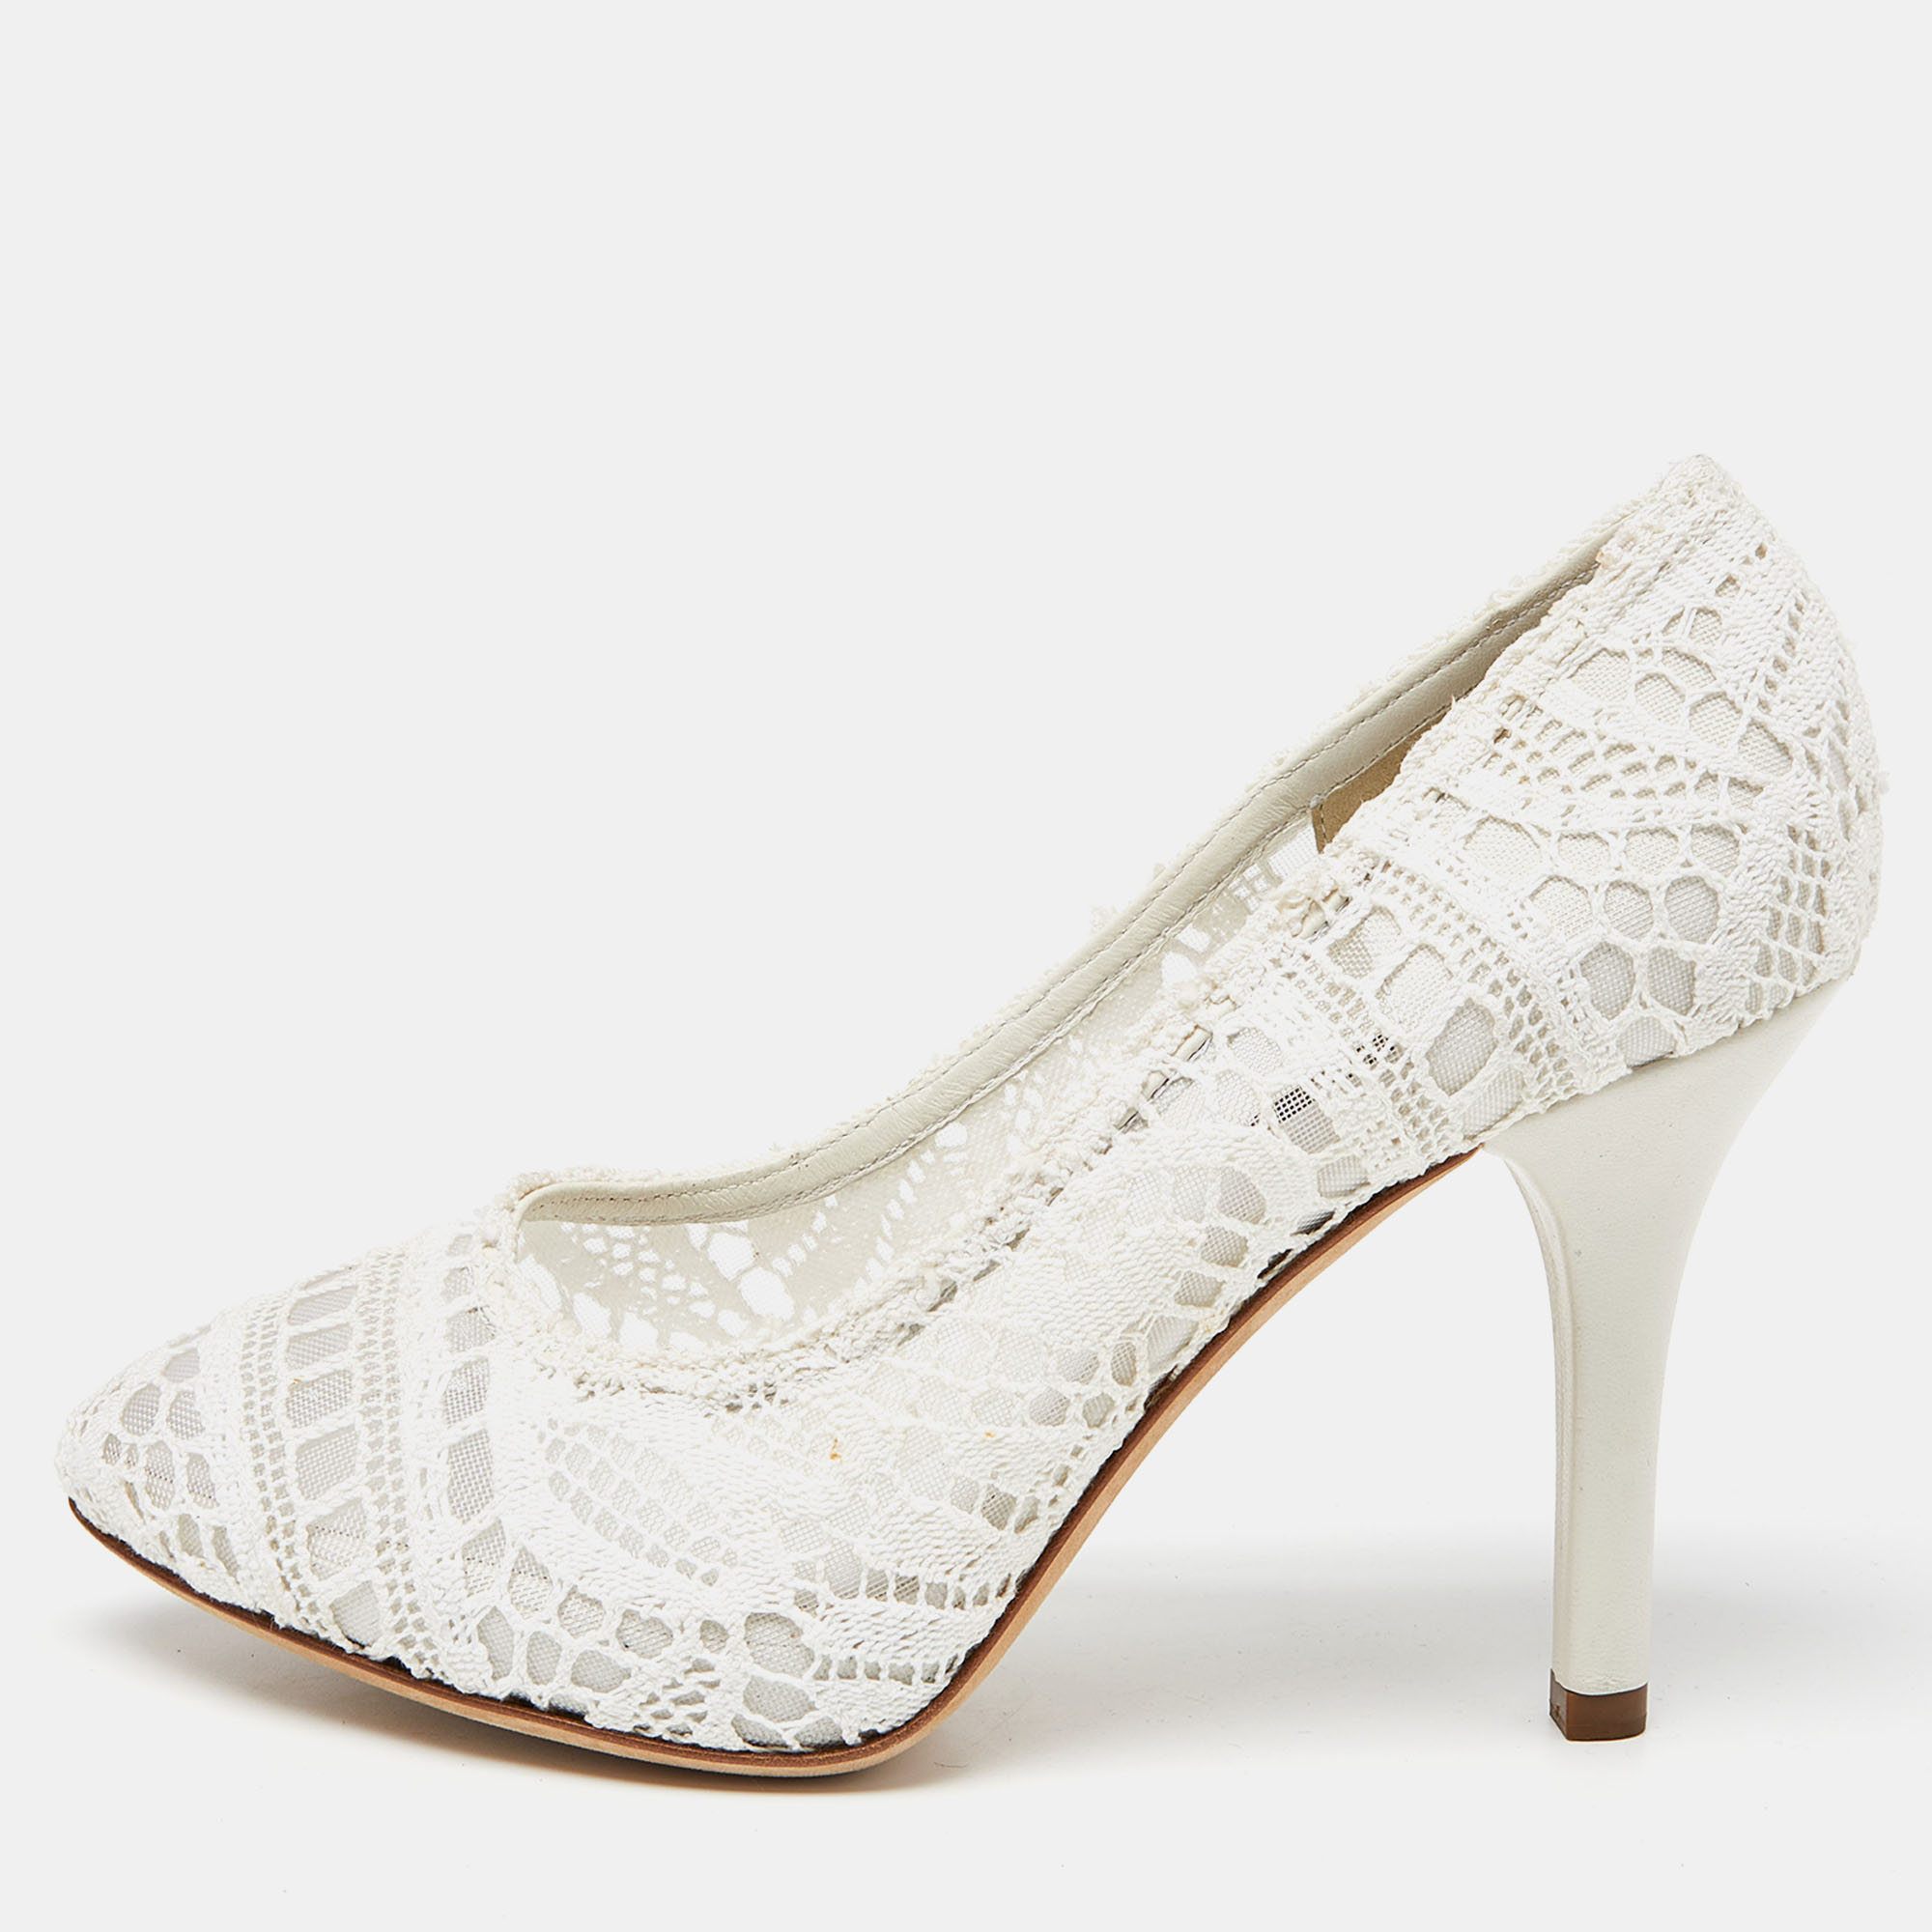 Pre-owned Dolce & Gabbana White Lace Pumps Size 37